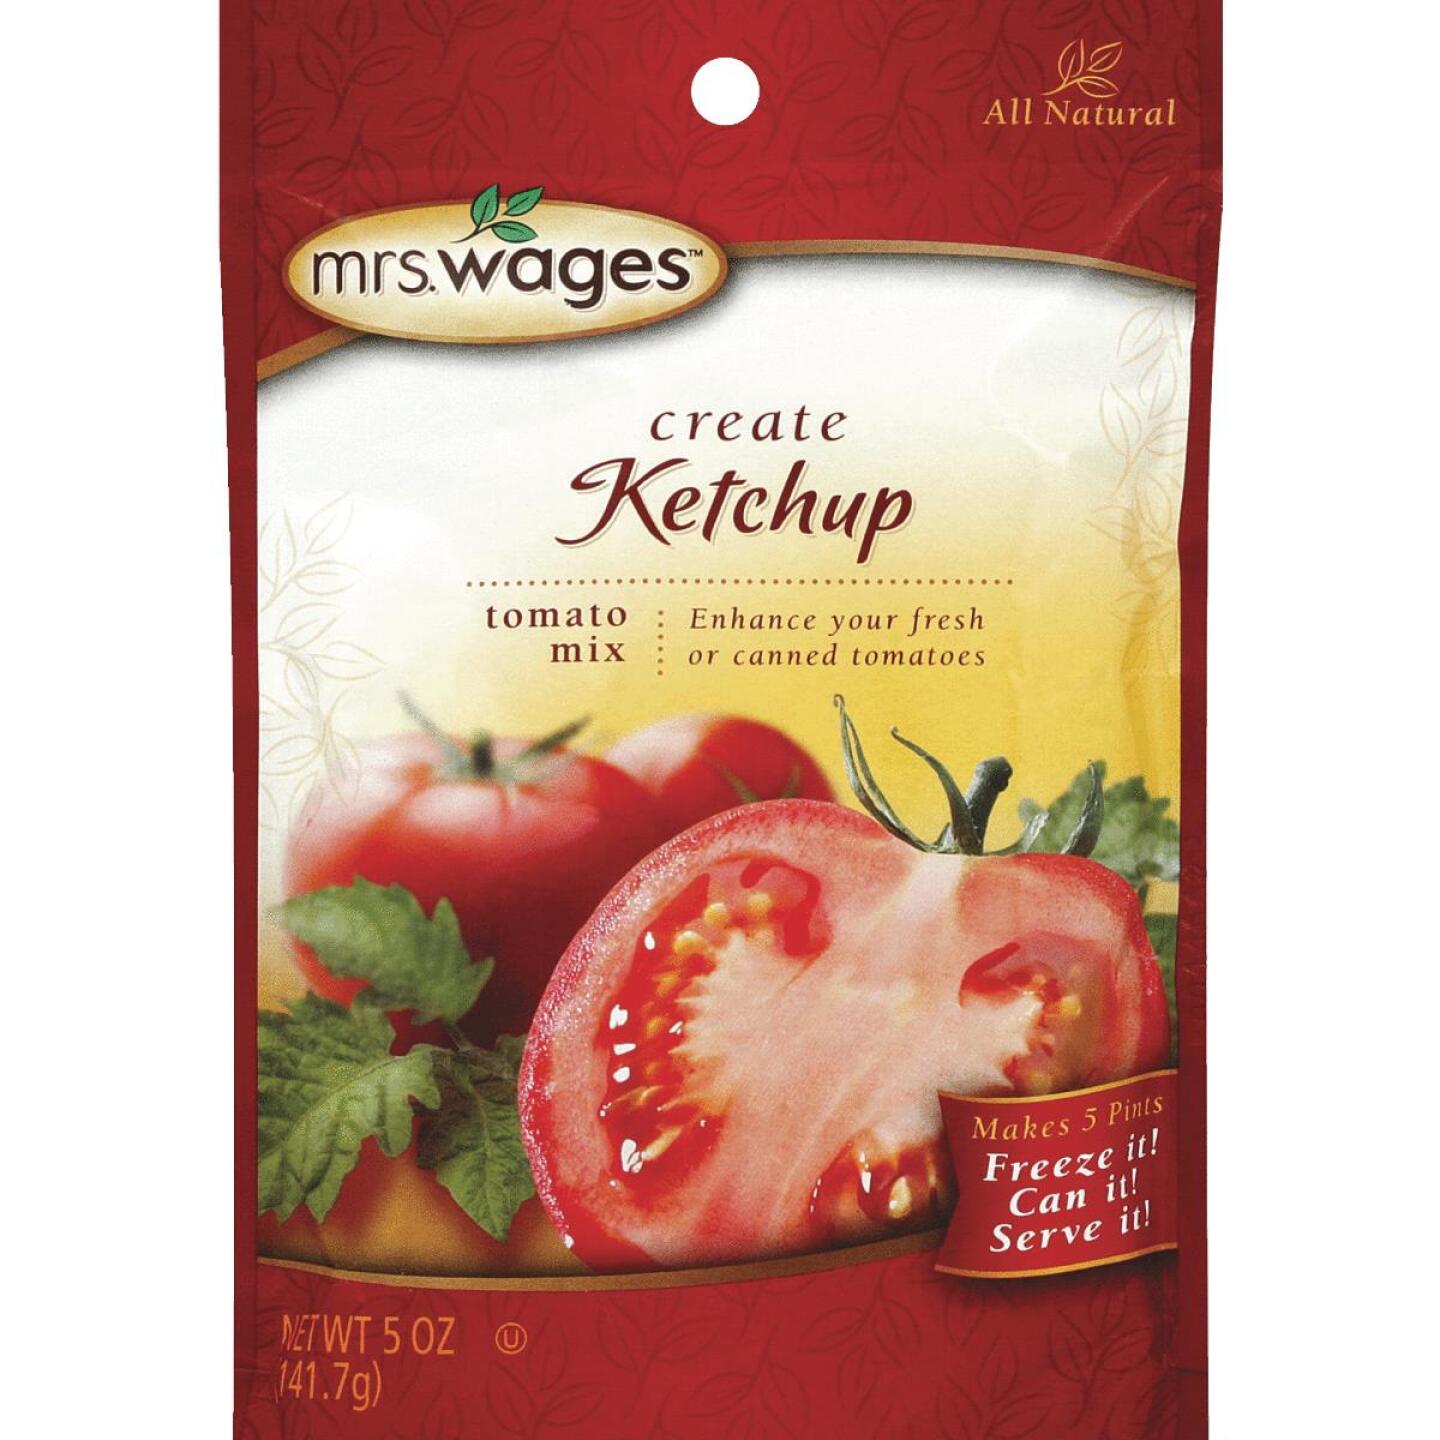 Mrs. Wages, Mrs. Wages 5 Oz. Ketchup Tomato Mix